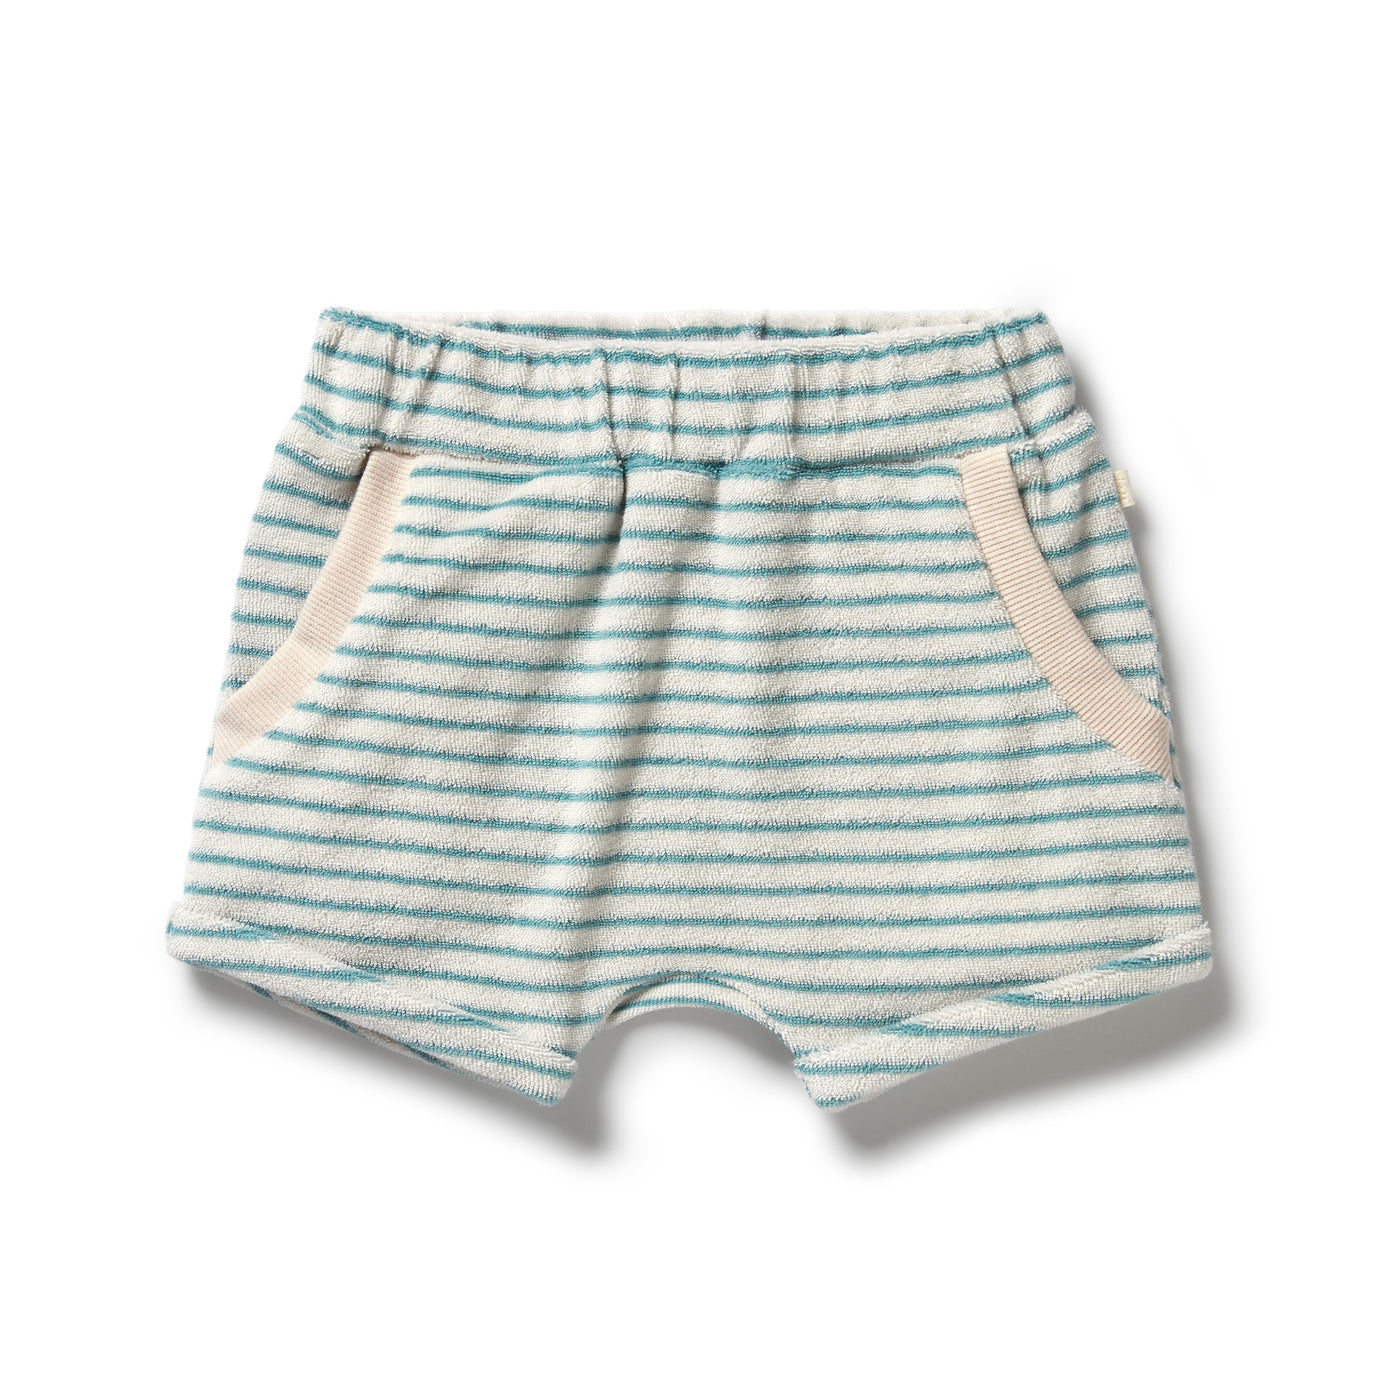 Organic Terry Slouch Short - Mineral Blue Stripe